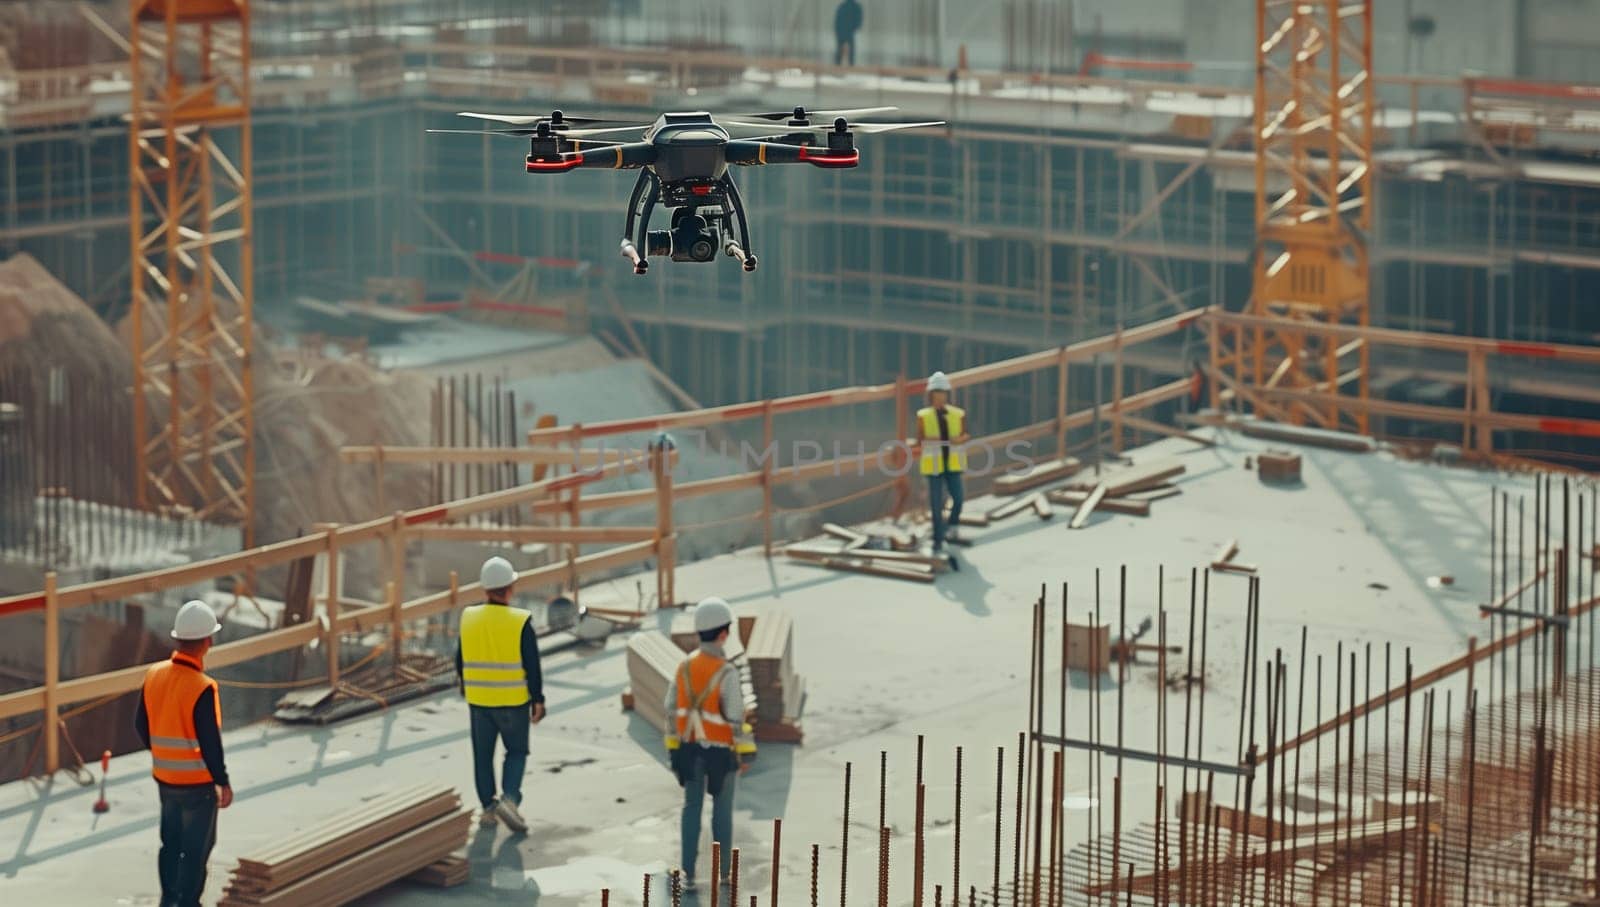 A drone is capturing aerial footage of a construction site near a city, showcasing water bodies, buildings, vehicles, asphalt, urban design, fences, and recreational areas